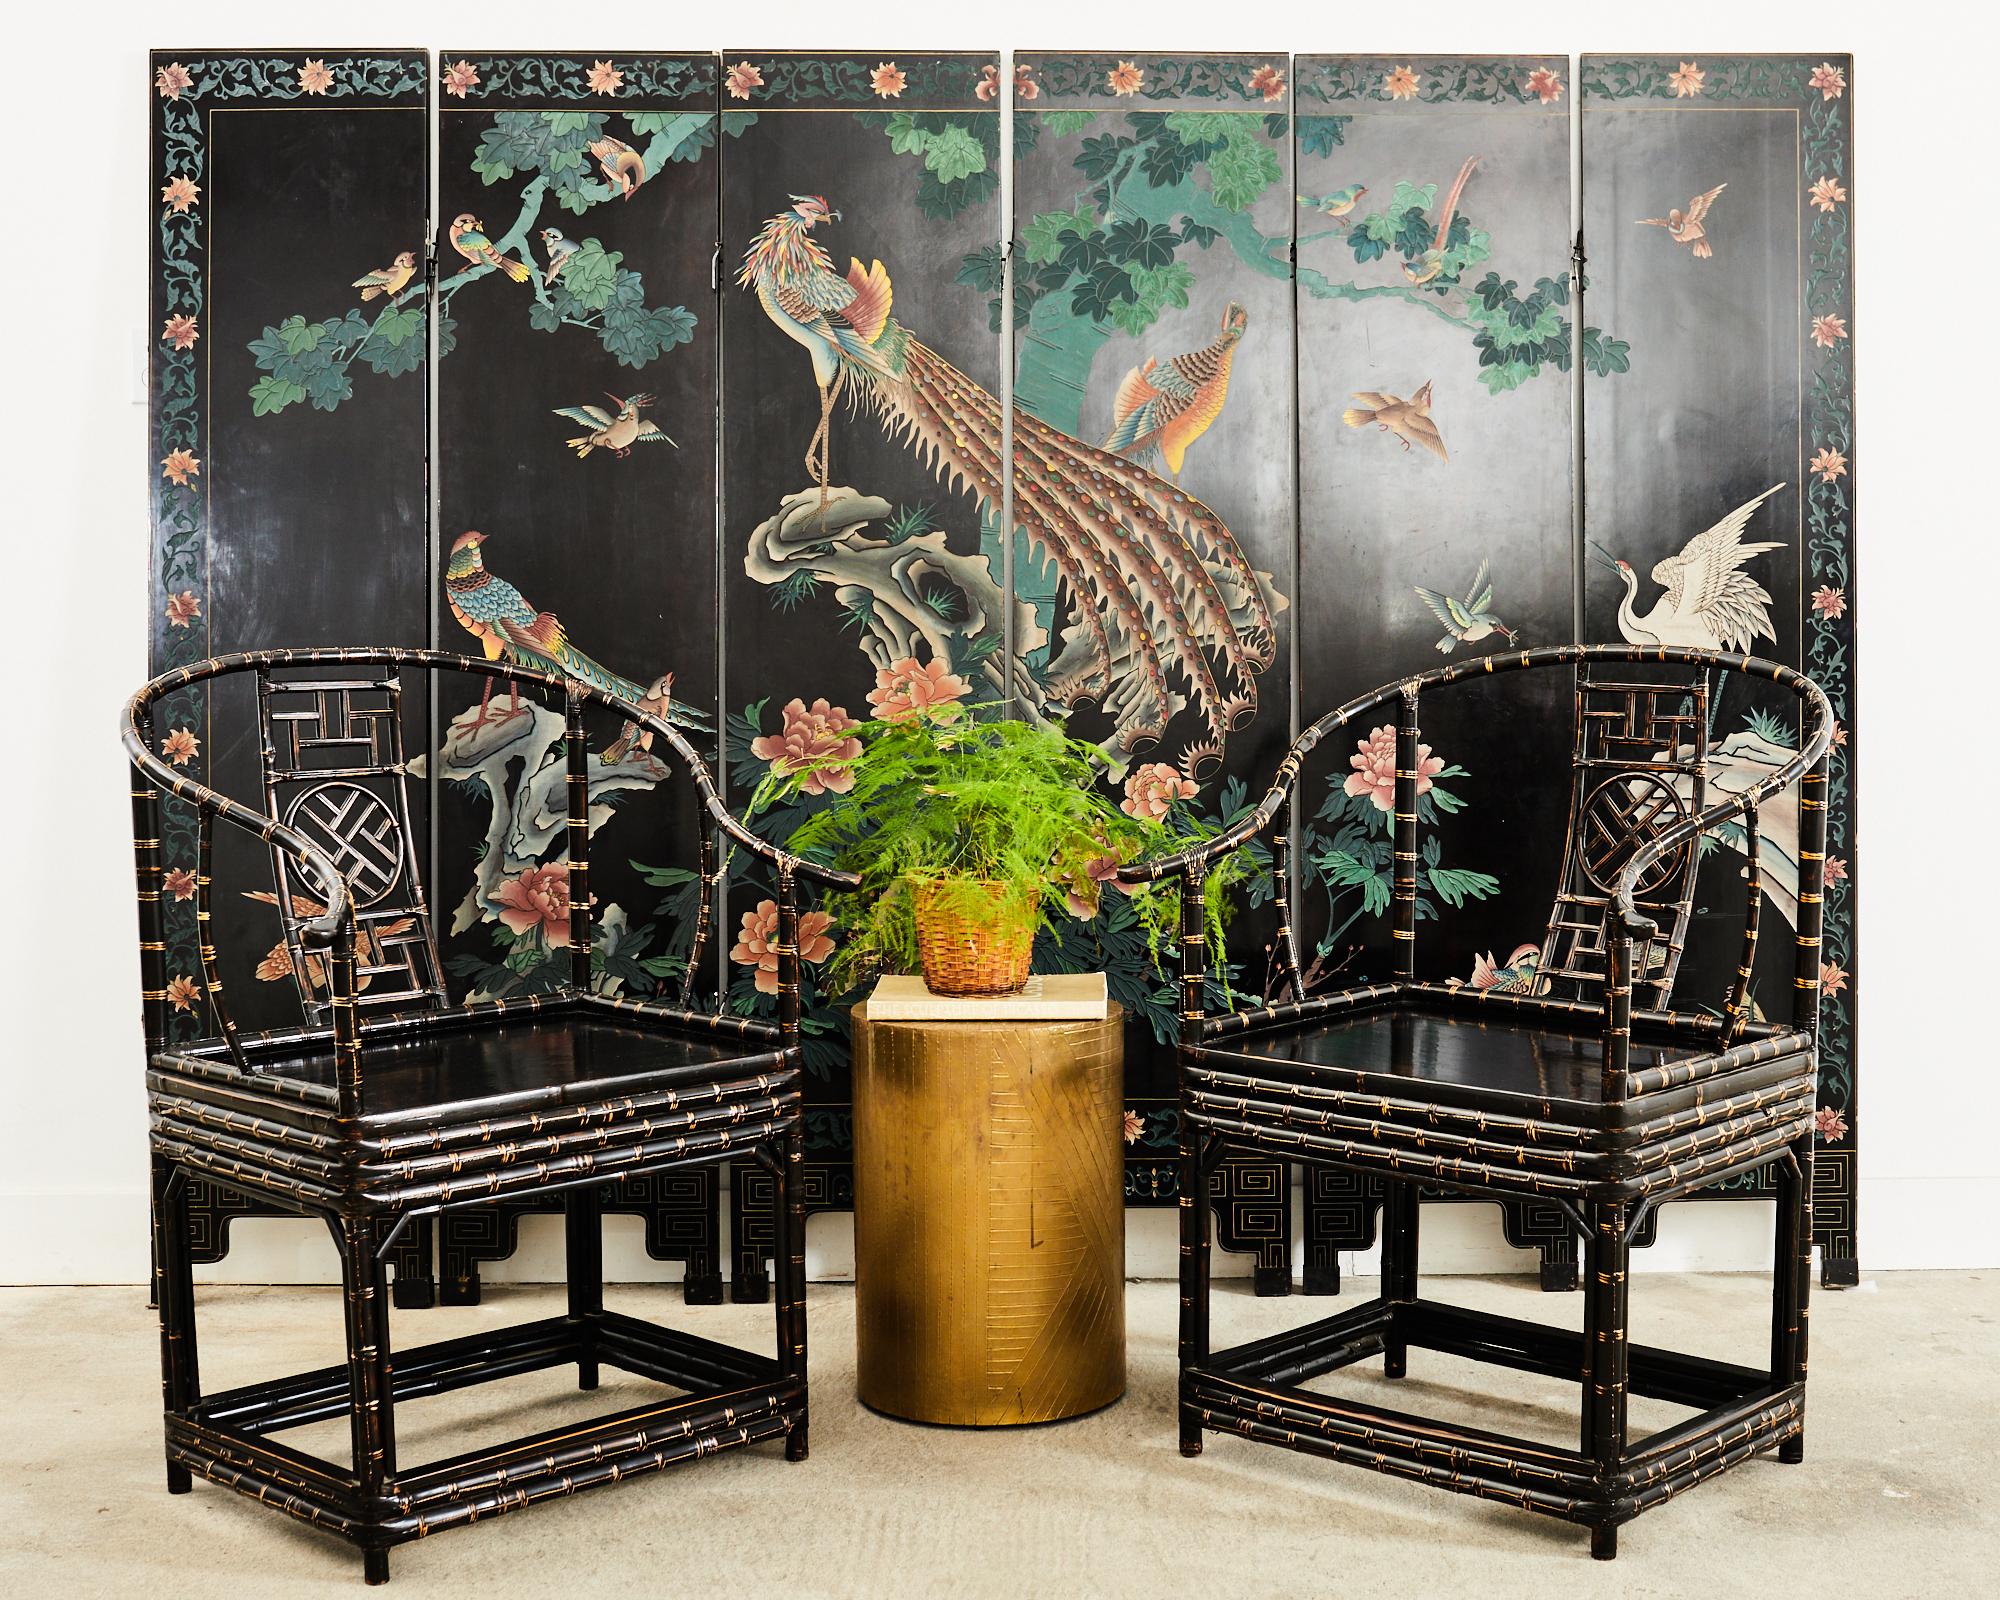 Stylized 20th century Chinese export coromandel screen depicting an exotic bird landscape. The front side of the six panel screen is centered by a large mythical bird with colorful plumage. Each panel is 16 inches wide and crafted from solid